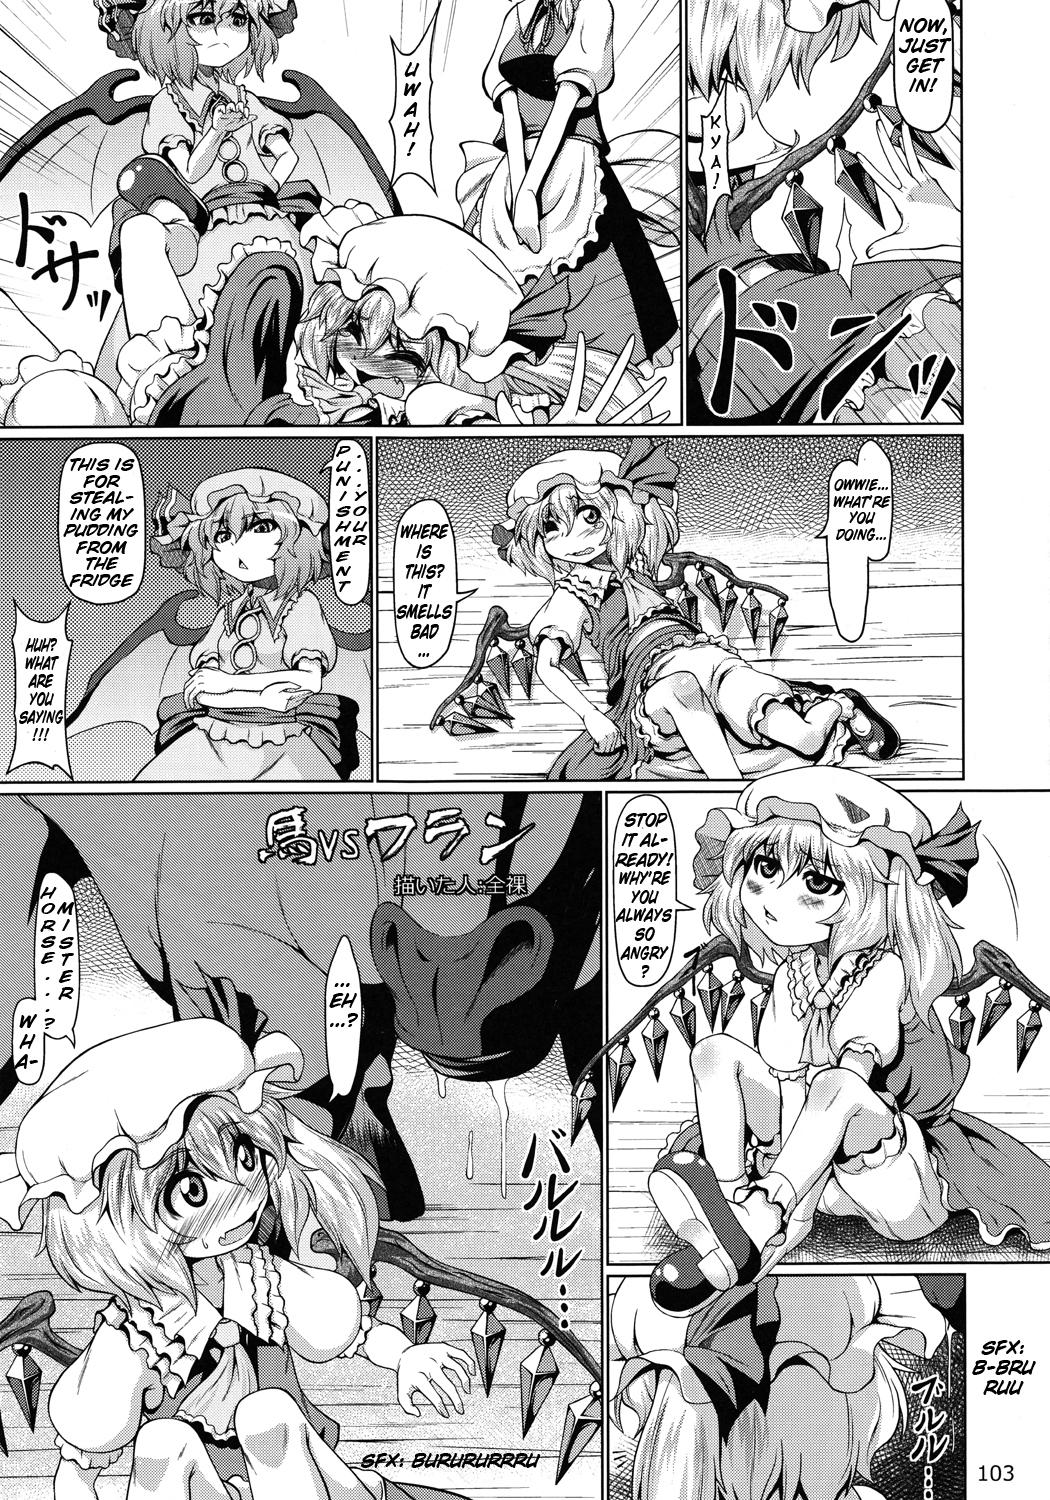 Hair Horse vs Flan - Touhou project Step Fantasy - Picture 1